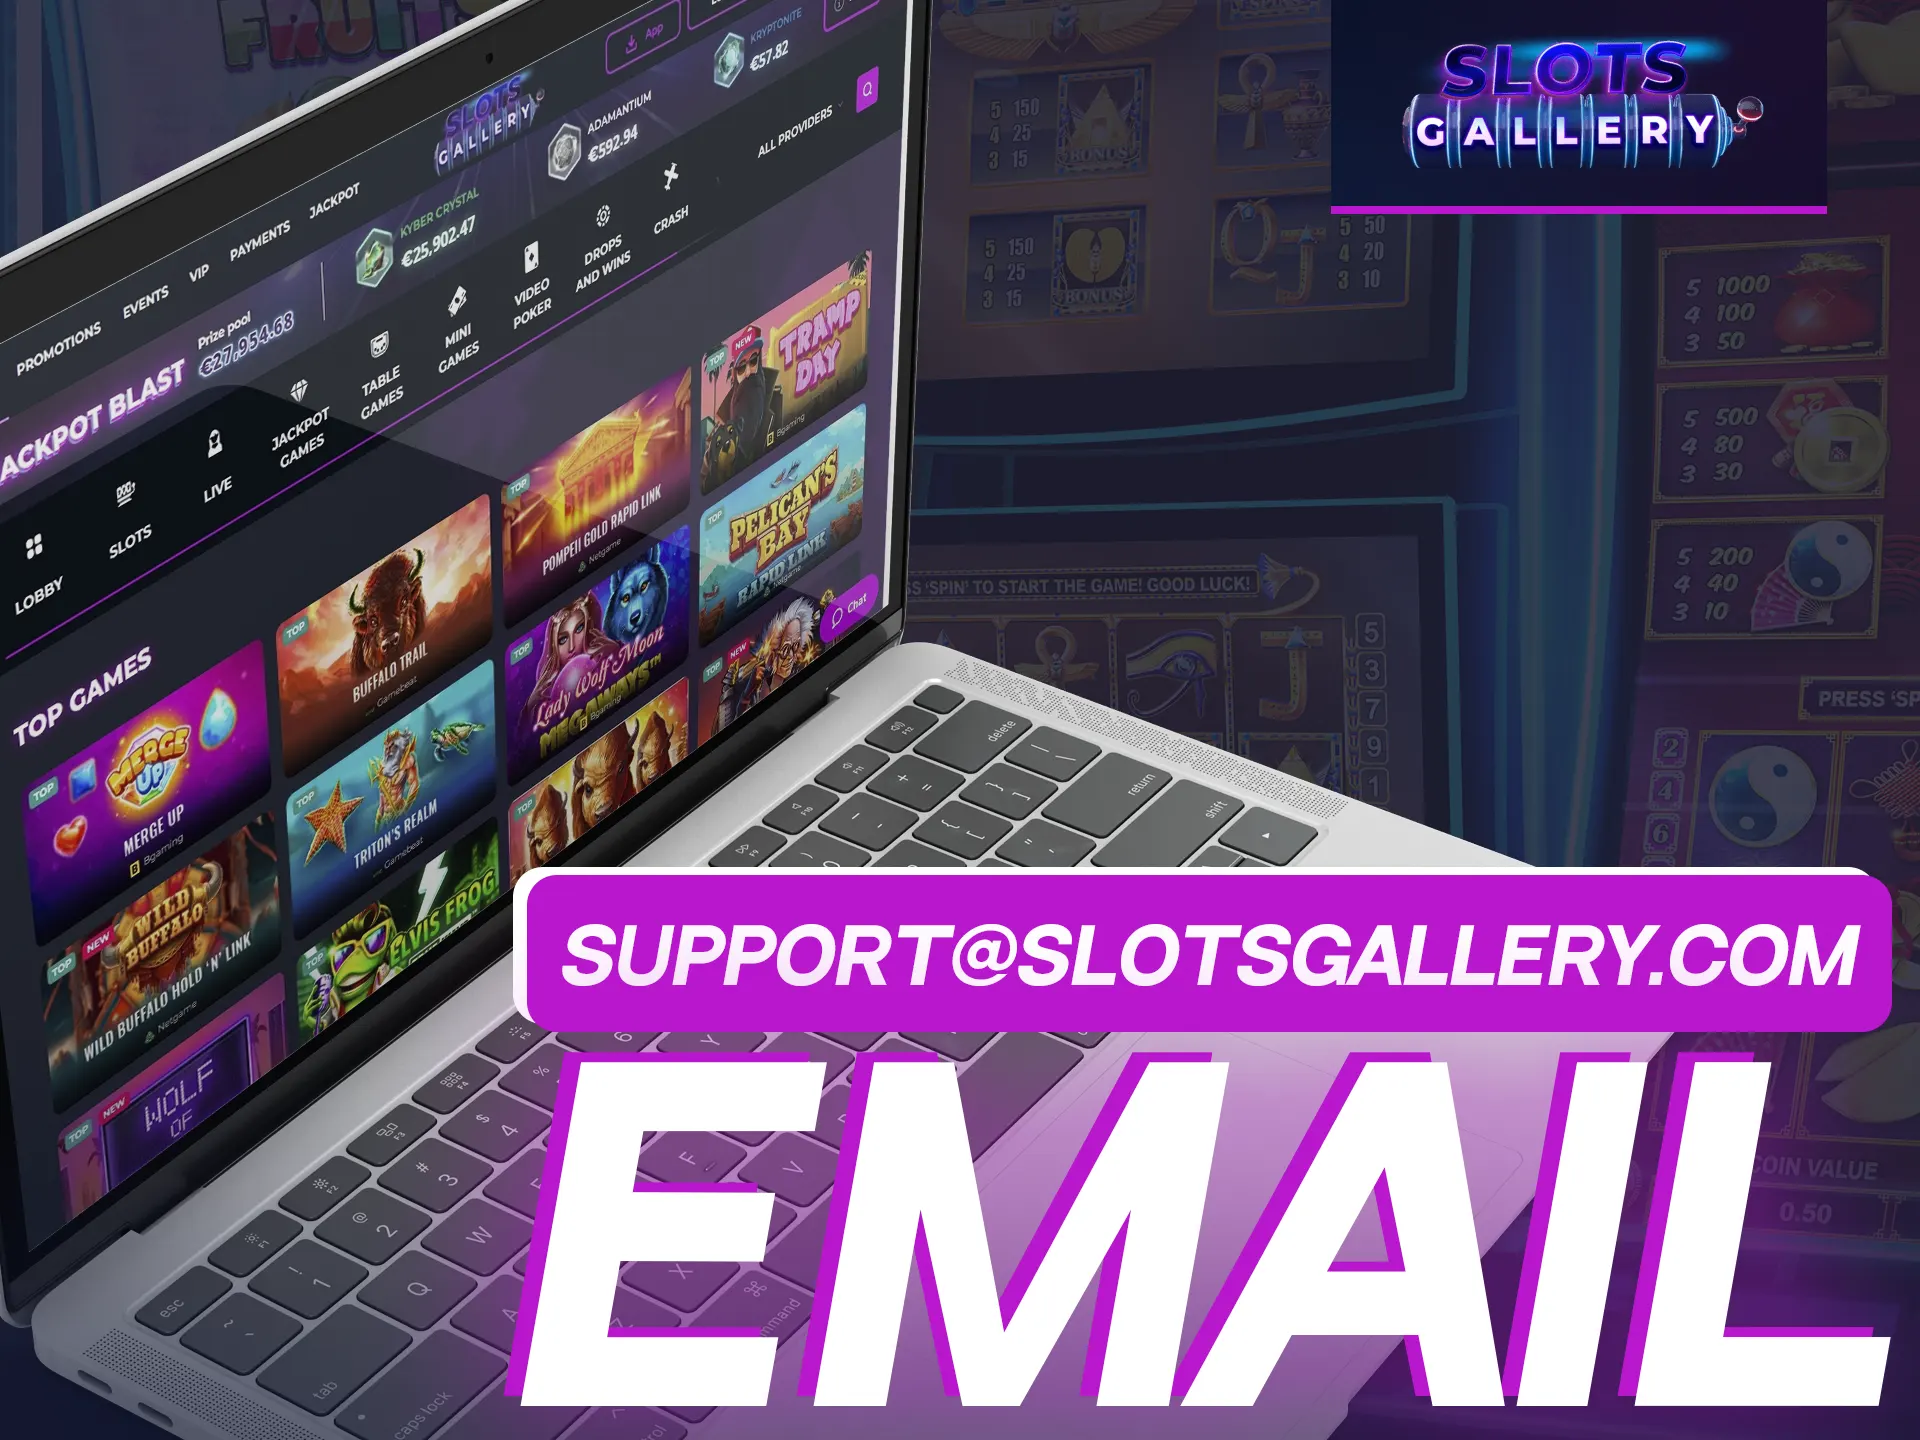 Contact Slots Gallery support via email for prompt issue resolution.